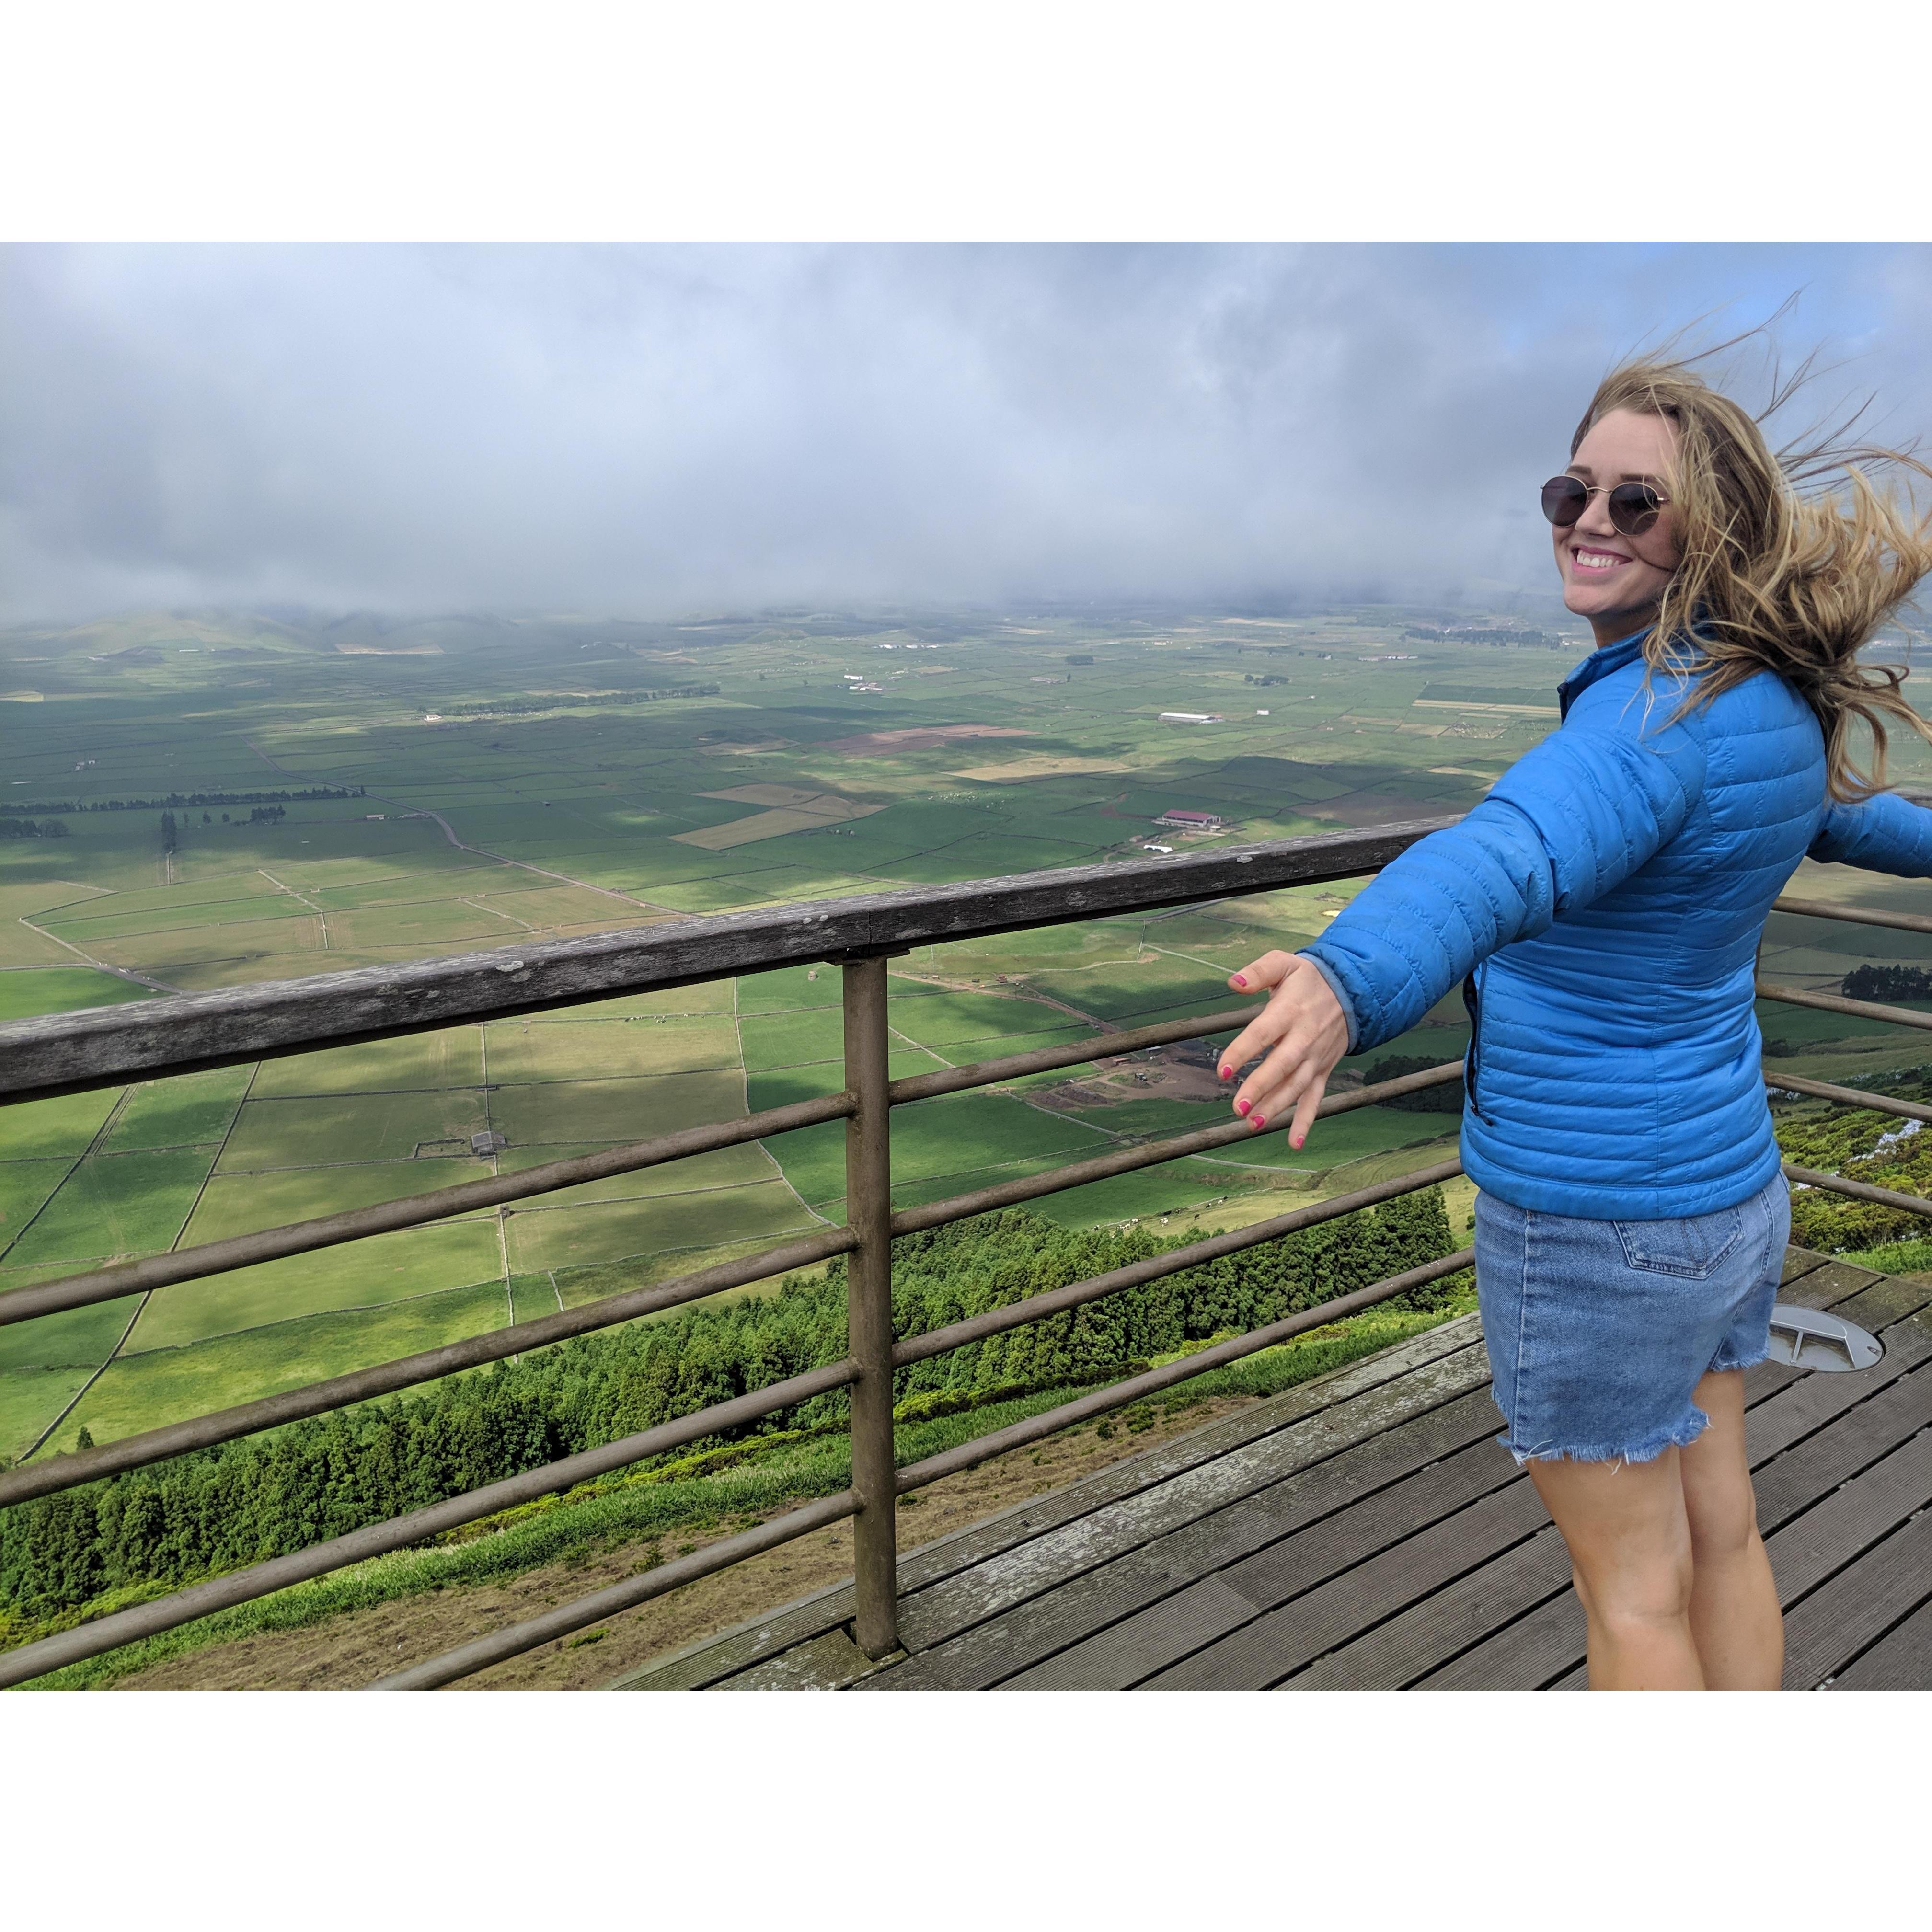 A VERY windy lookout point while on our tour in the Azores.